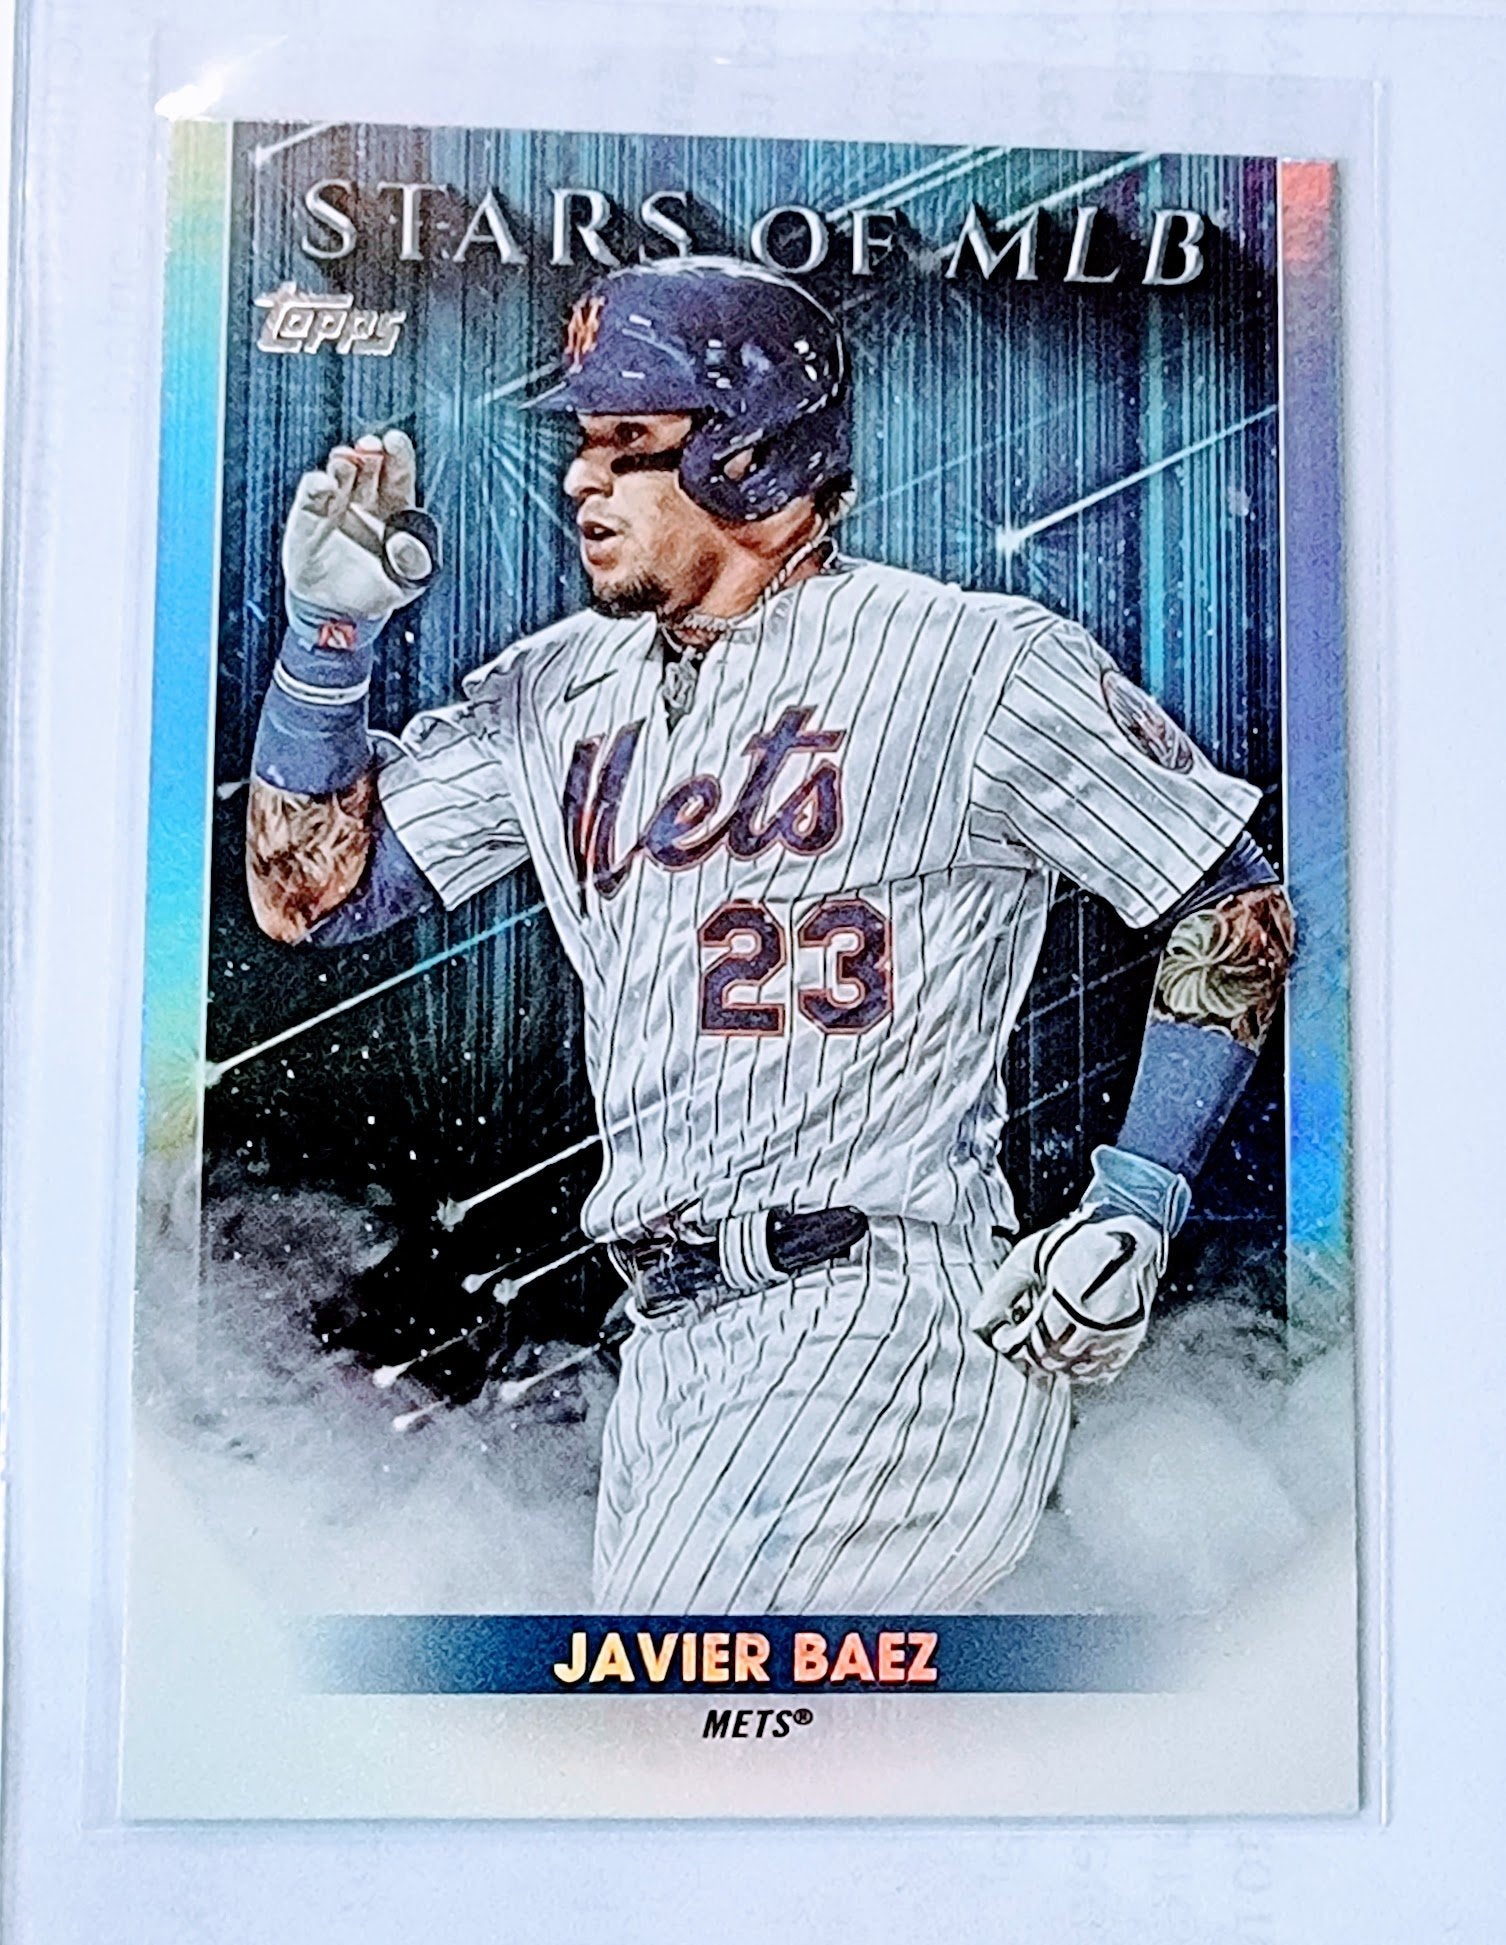 2022 Topps Javier Baez Stars of the MLB Baseball Trading Card GRB1 simple Xclusive Collectibles   